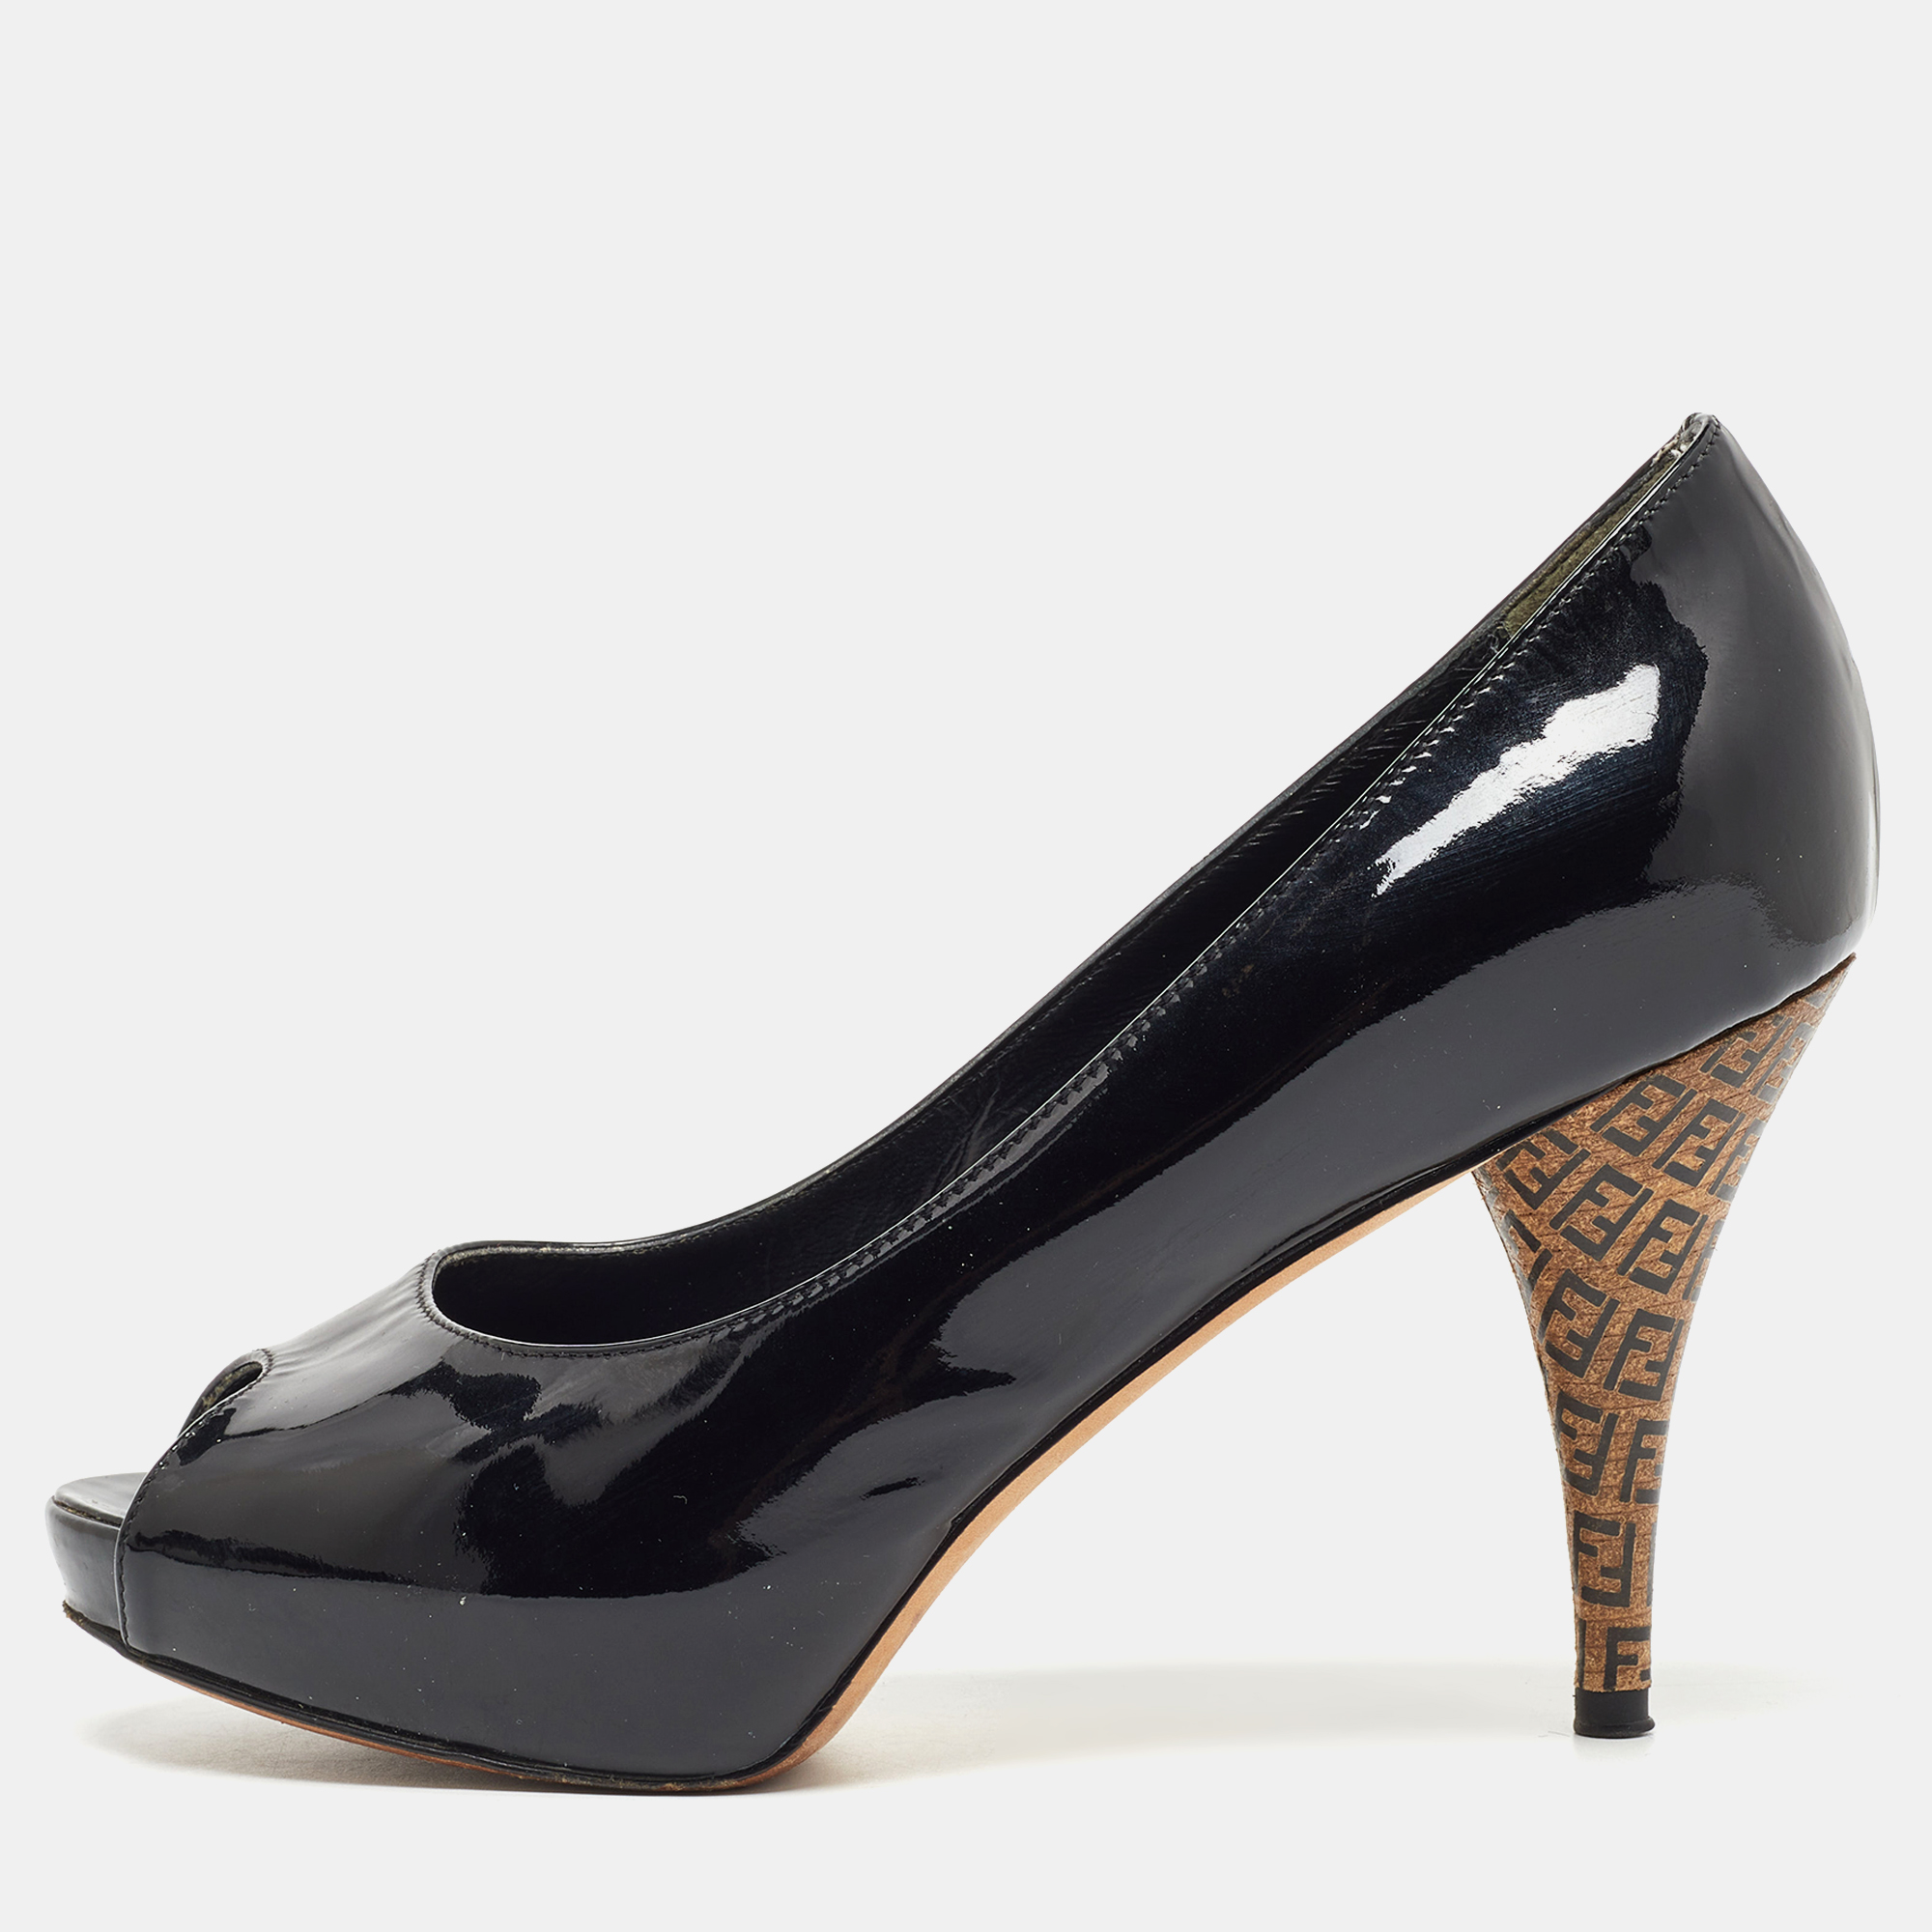 The house of Fendi brings you these impressive pumps that will complement any outfit. These beauties are crafted from patent leather and feature a peep toe silhouette. They come equipped with comfortable leather lined insoles and are elevated on the FF logo detailed 9cm heels.